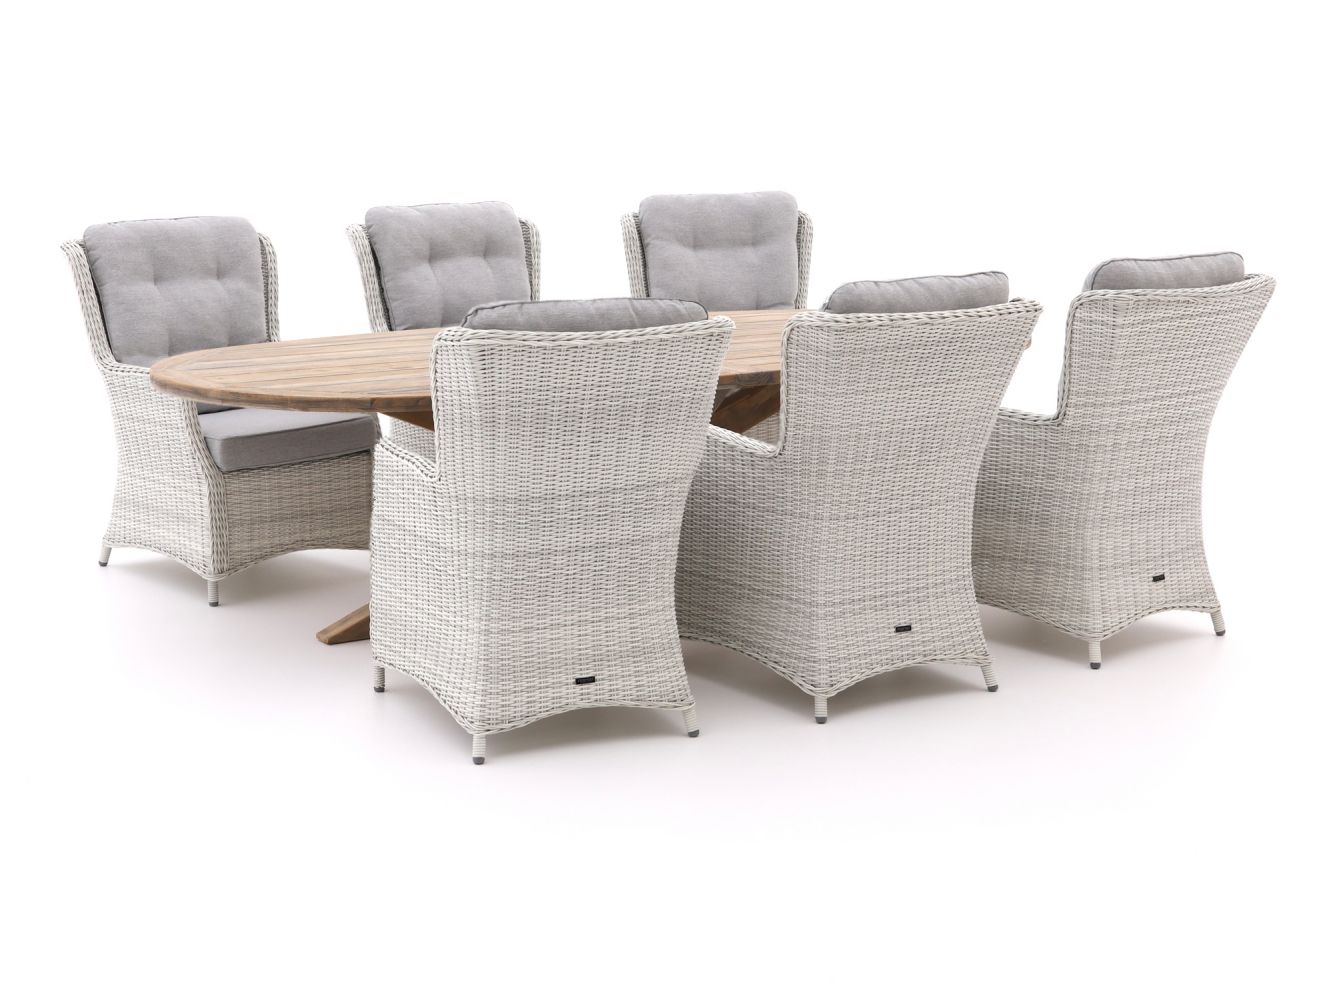 Intenso Milano/ROUGH-Y Ellips 280cm lounge-dining tuinset 7-delig